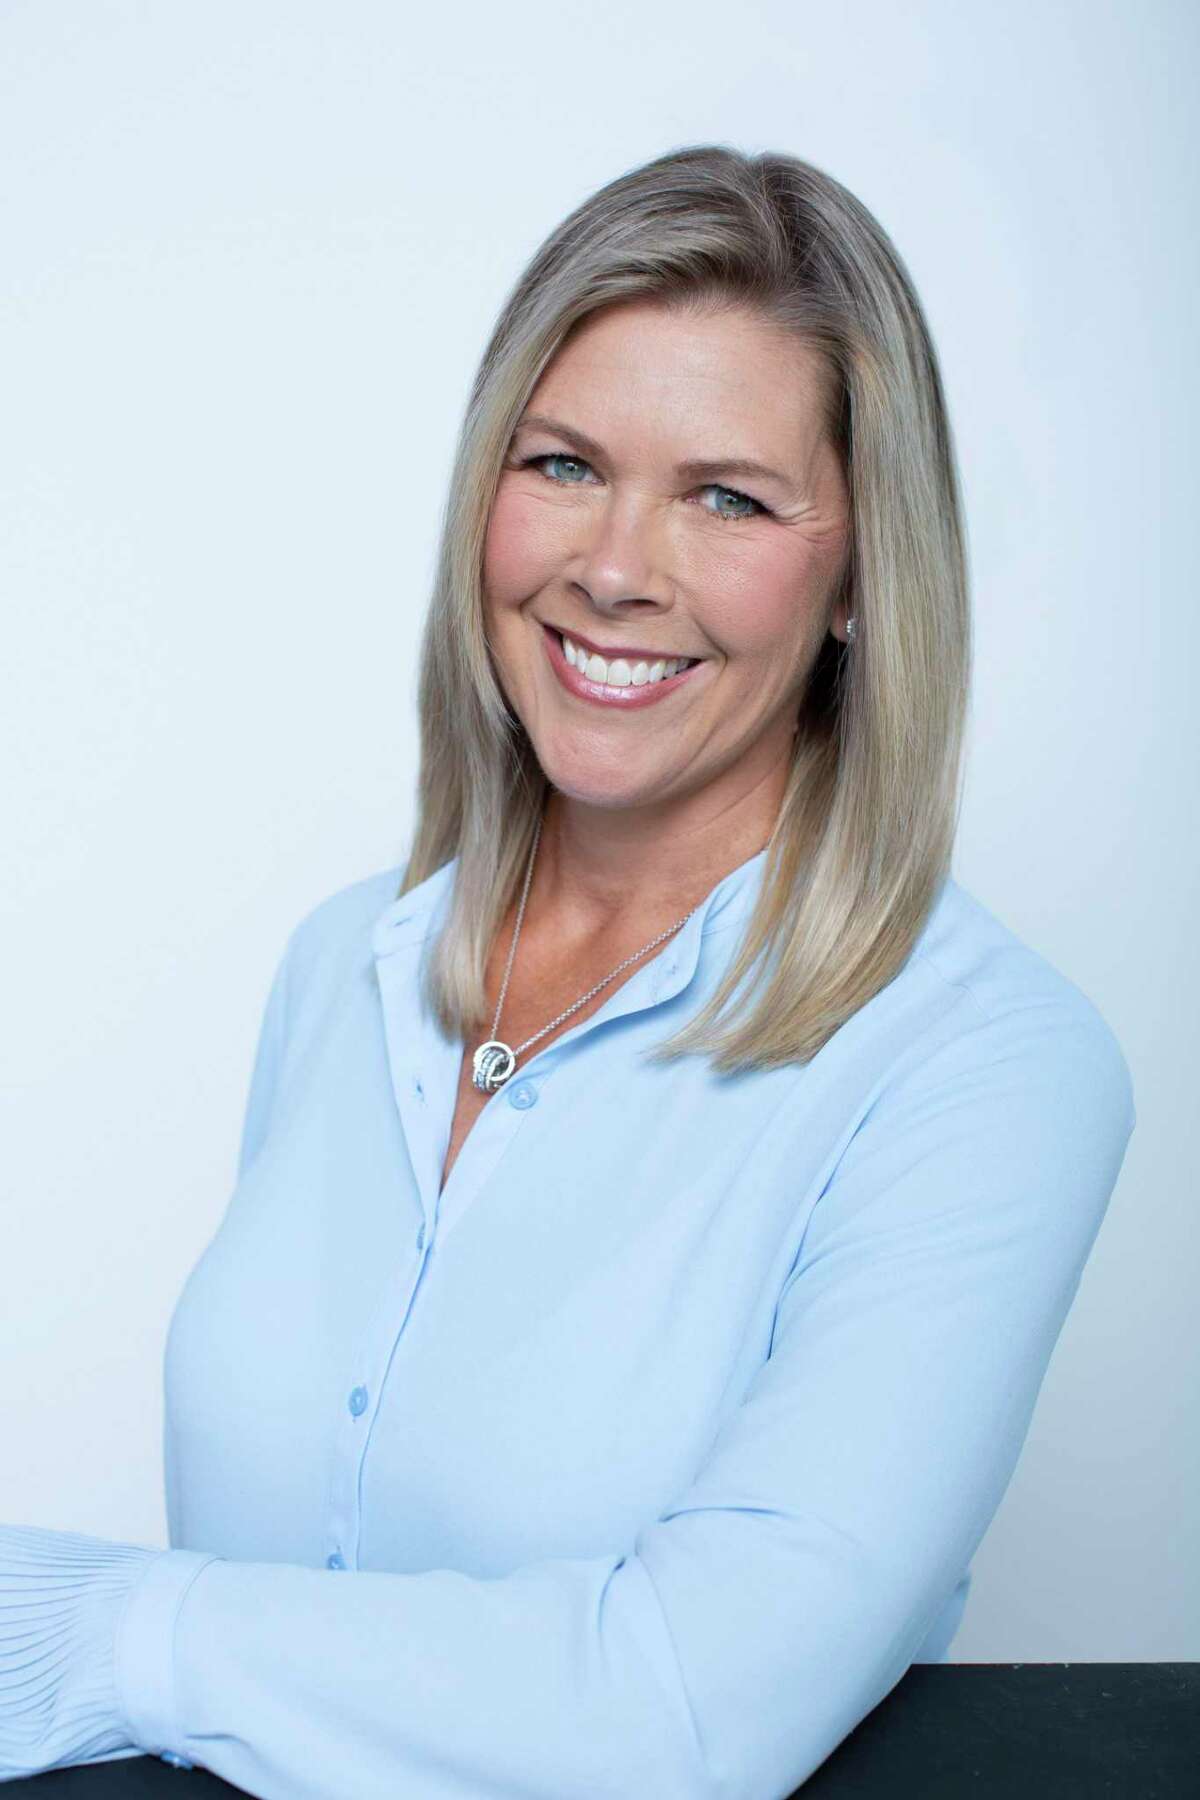 Julie Peters has been appointed branch vice president of Coldwell Banker Realty ’s Global Luxury offices in Greenwich and Old Greenwich, overseeing approximately 200 sales associates serving Fairfield County.